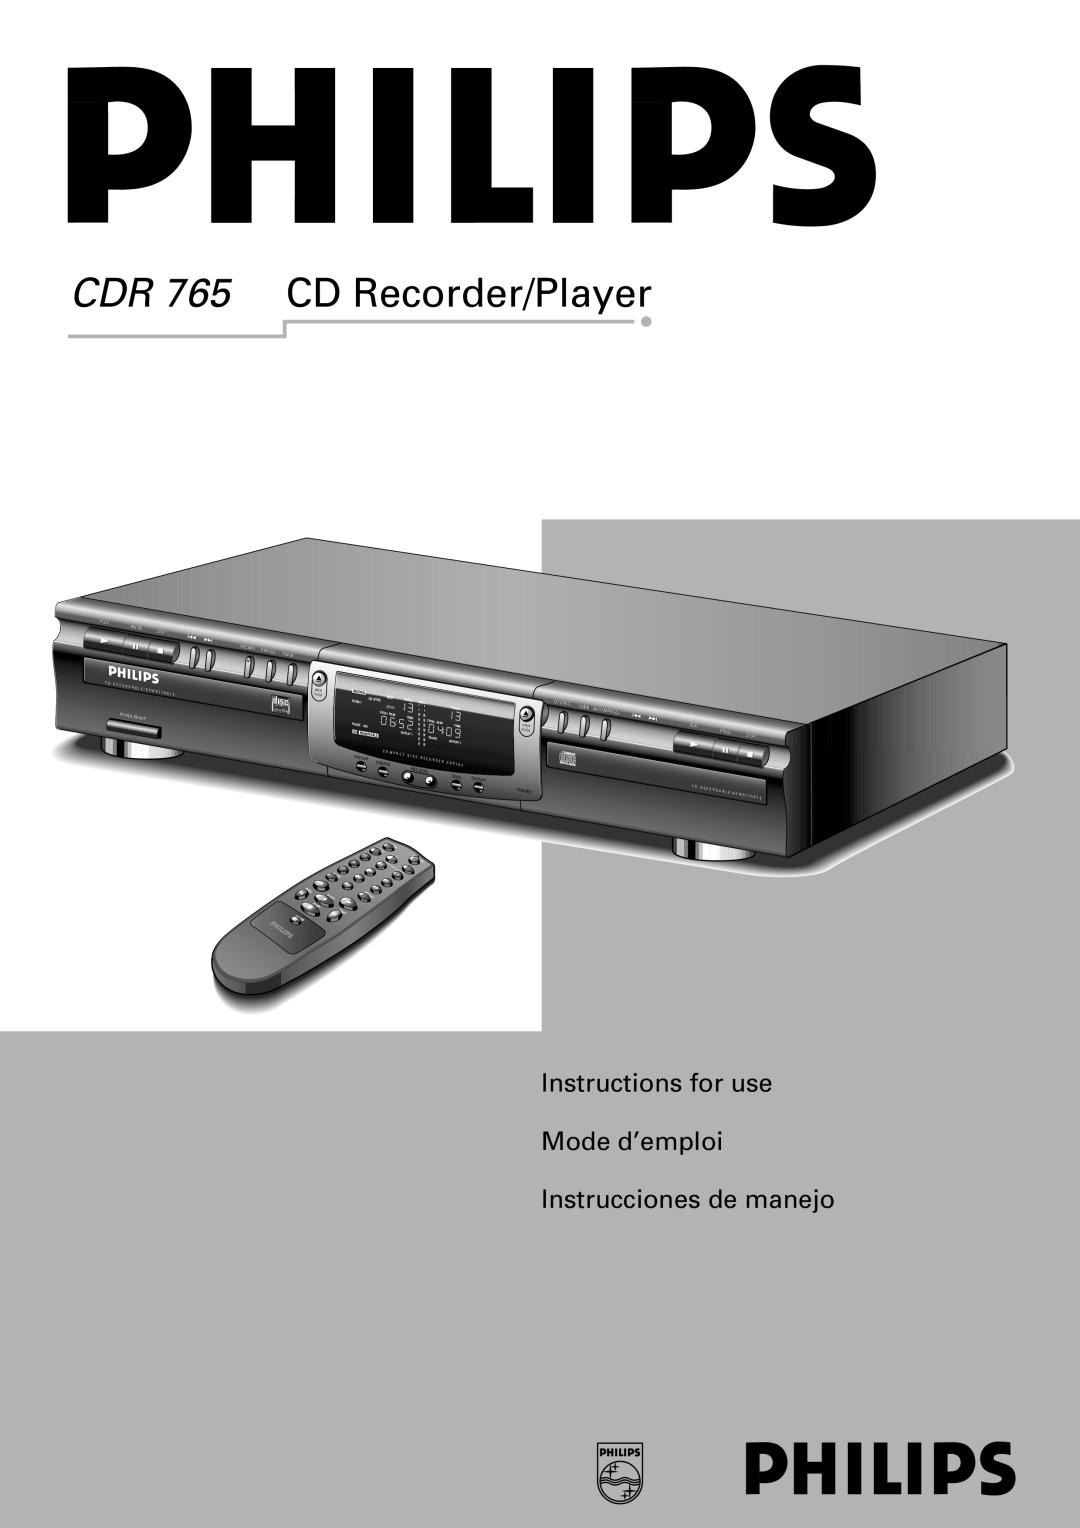 Philips manual Instructions for use Mode d’emploi, Instrucciones de manejo, CDR 765 CD Recorder/Player, Pause, Stop 